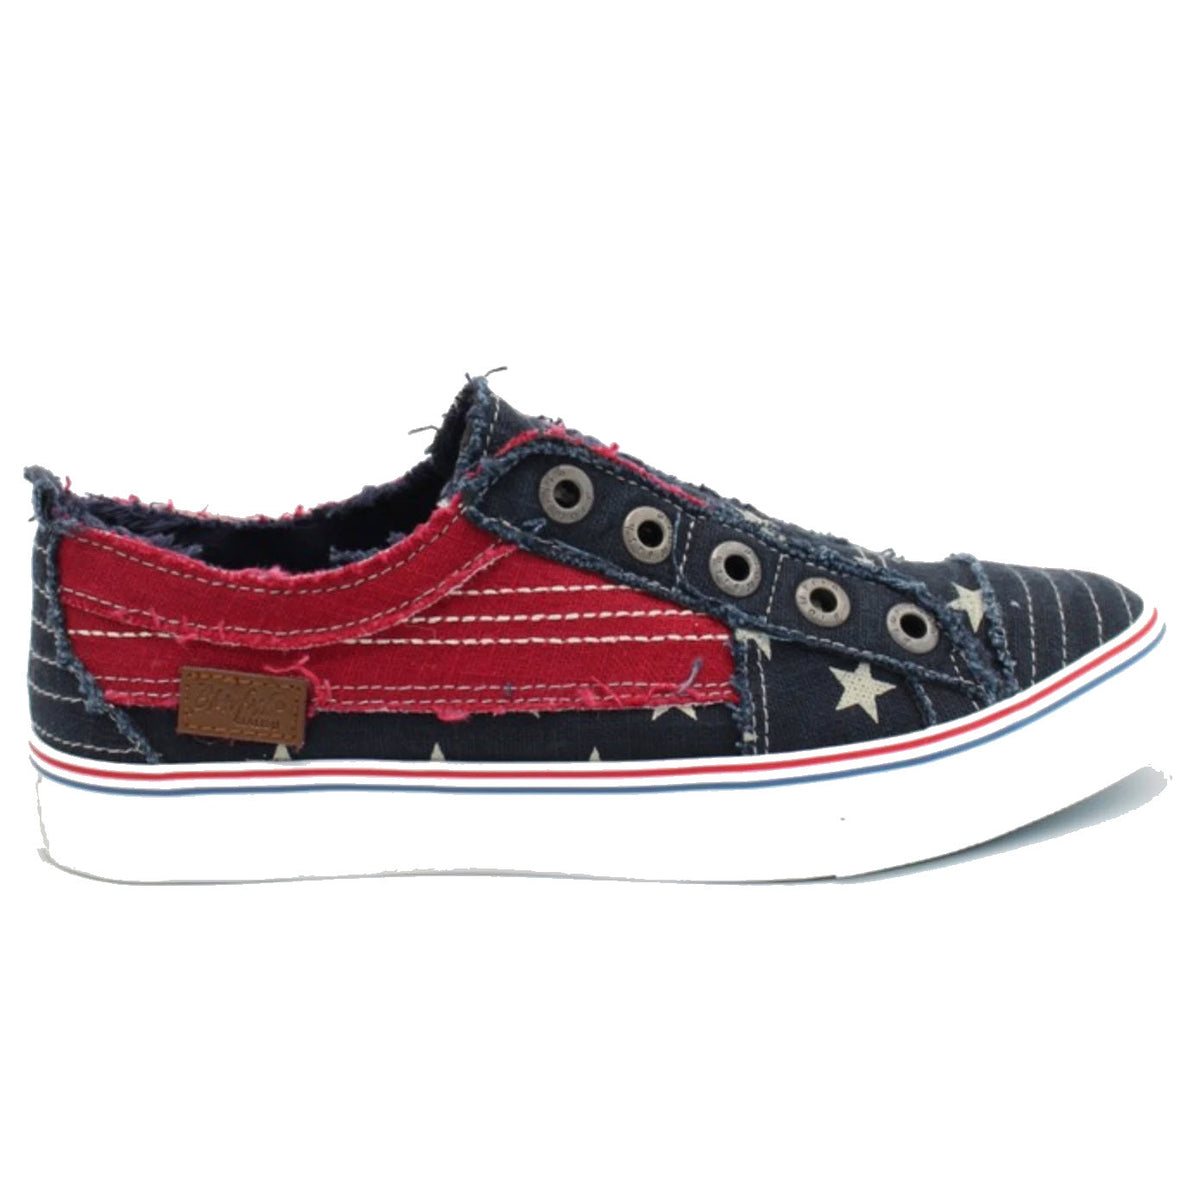 Side view of a casual Blowfish Play Stars and Stripes Navy/Red sneaker with a star design and frayed edges.